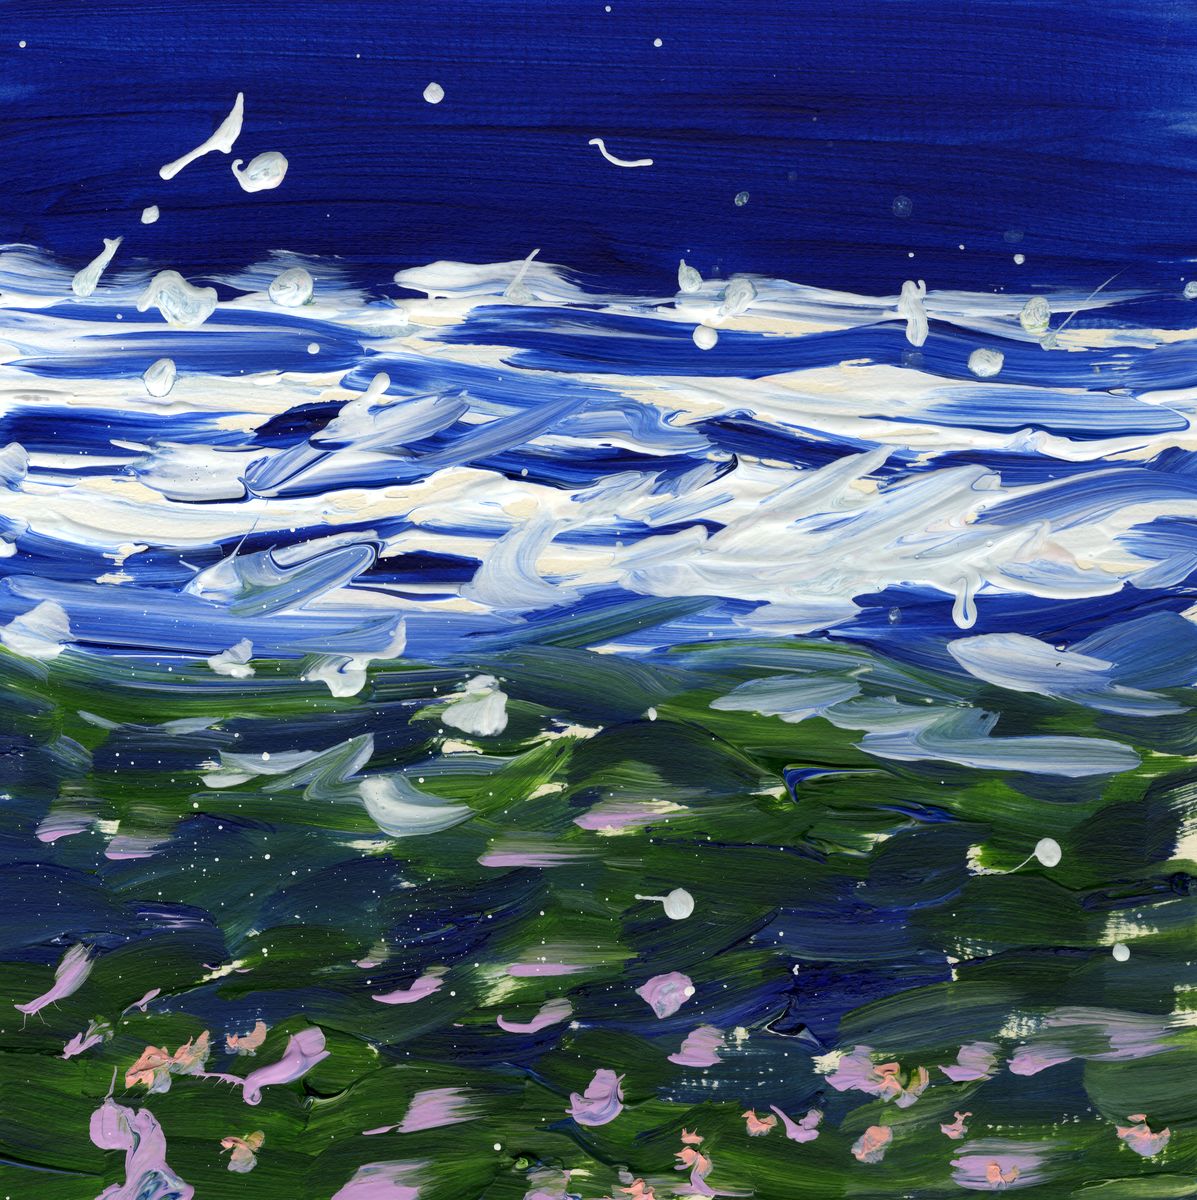 A print of an acrylic painting showing a blue and green sea by artist Jane Glue from Orkney, Scotland.